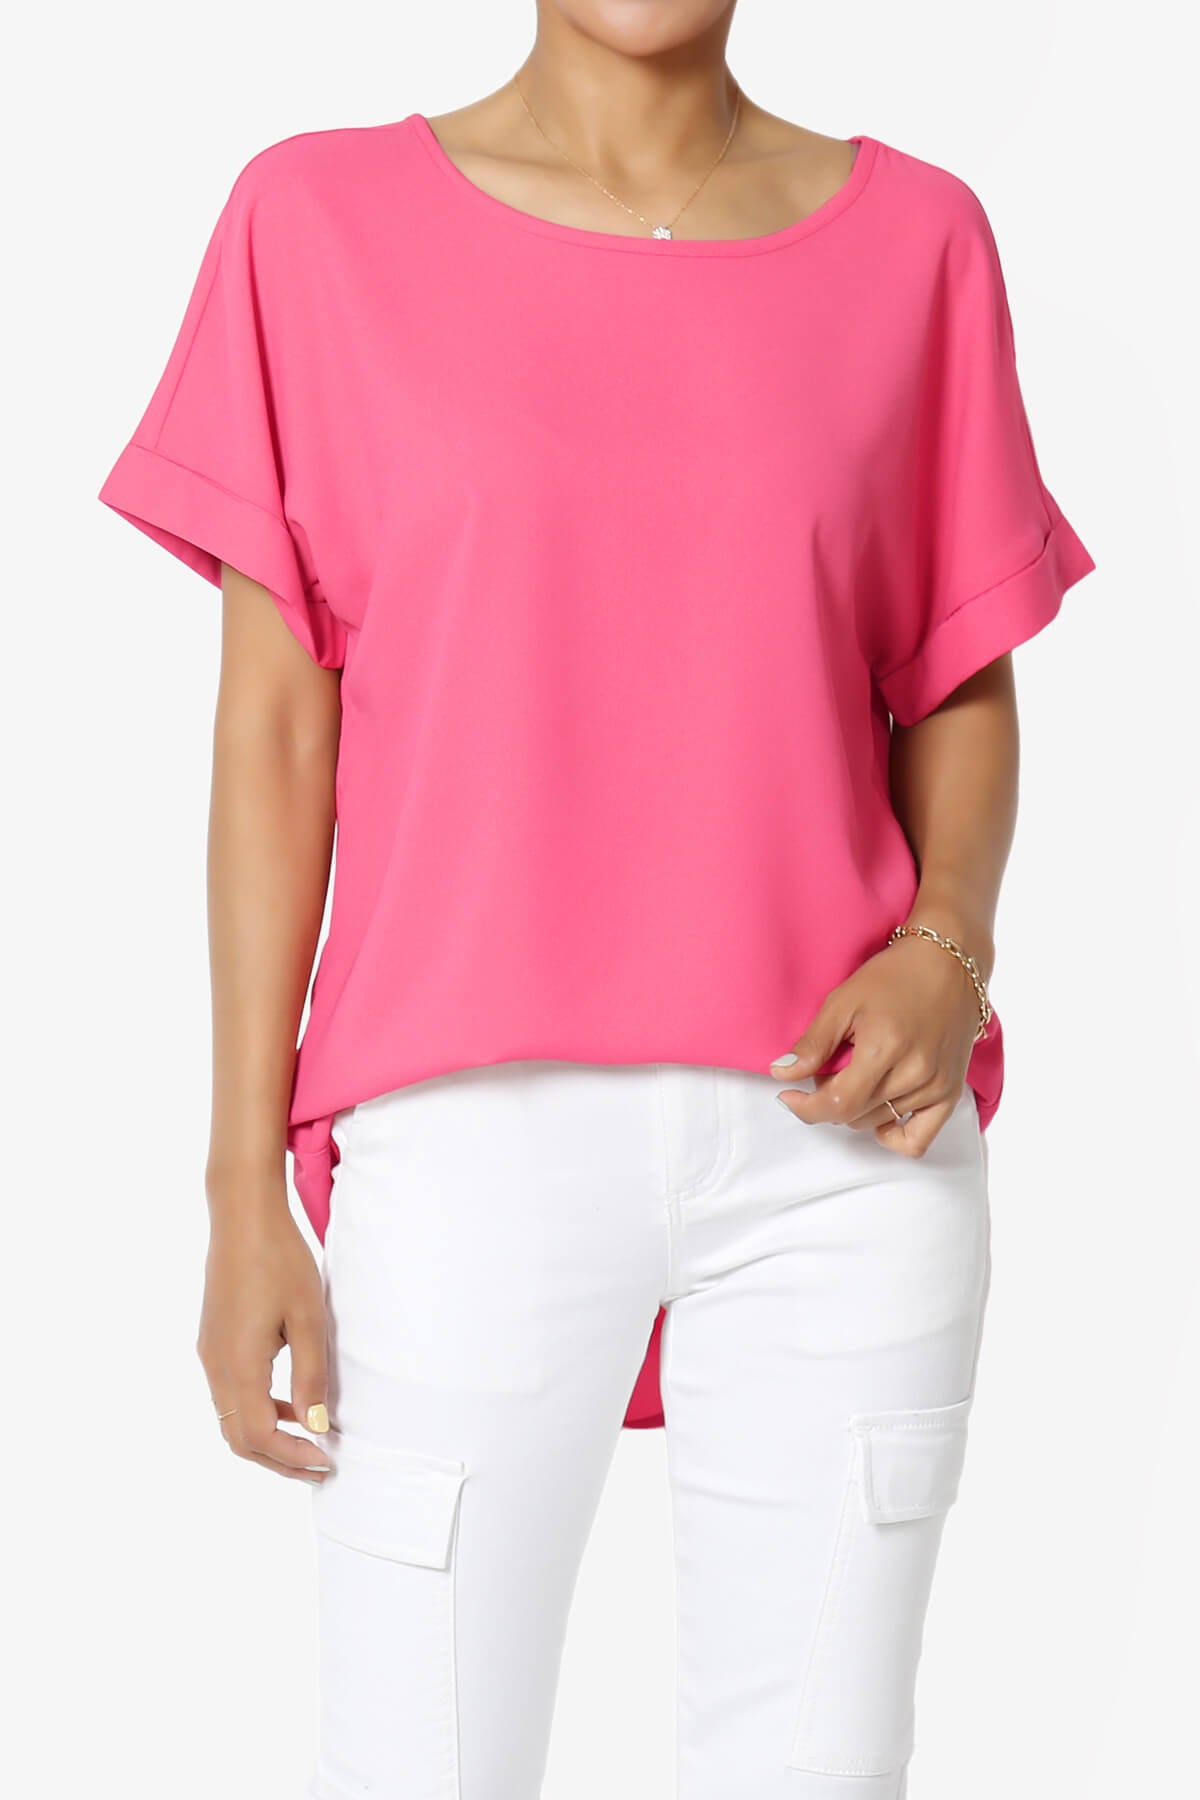 Load image into Gallery viewer, Marla Lightweight Woven Dolman Top FUCHSIA_1
